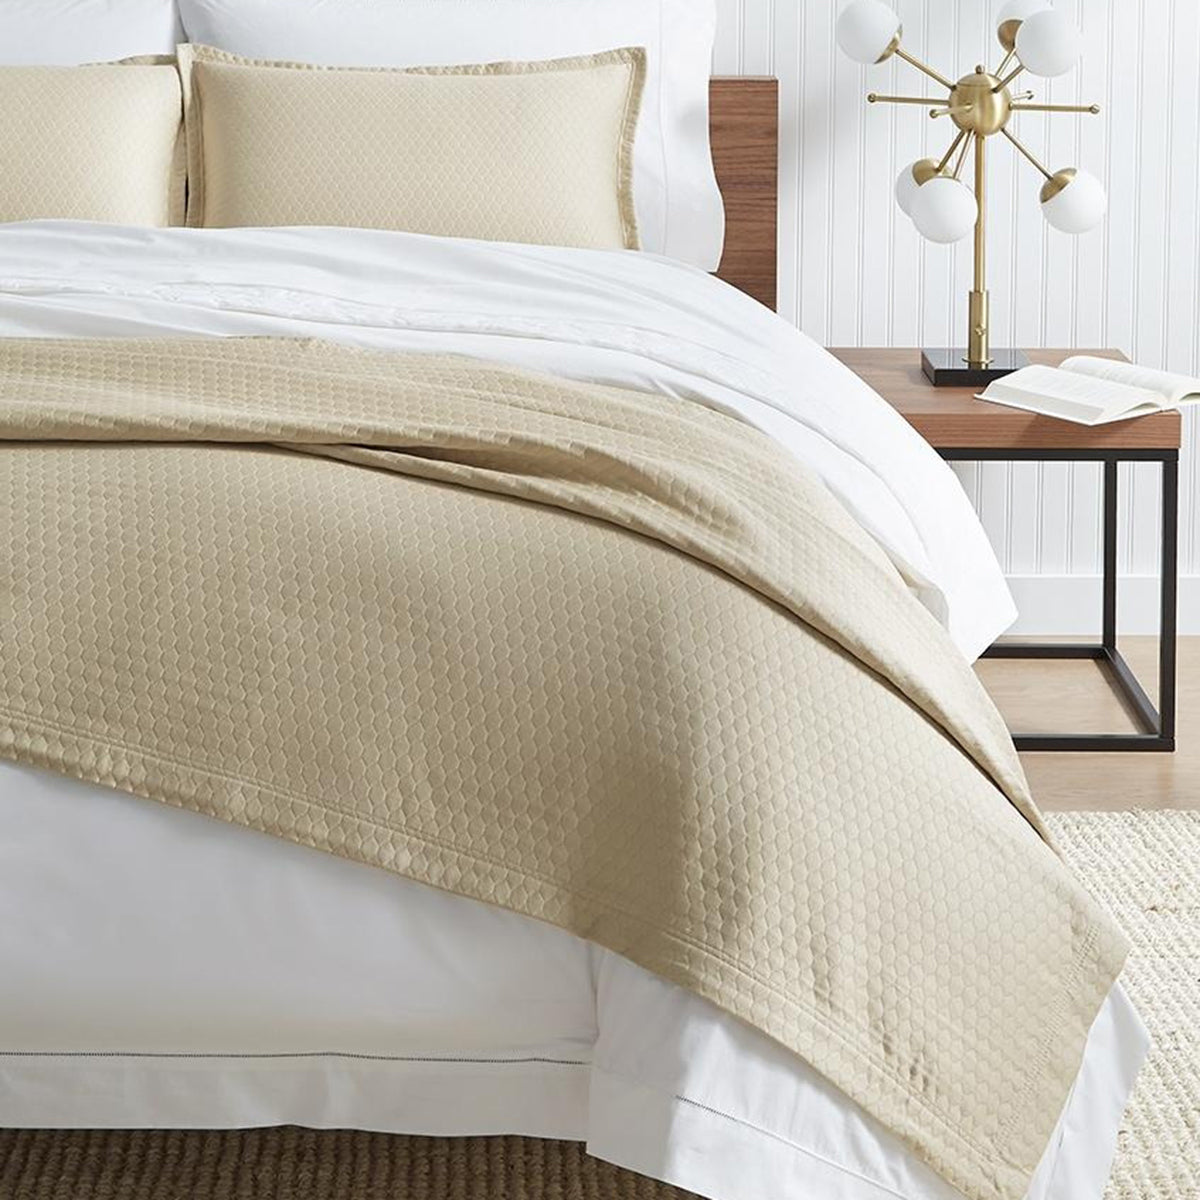 Image of a bed with a white comforter and a tan colored cover draped on top of comforter